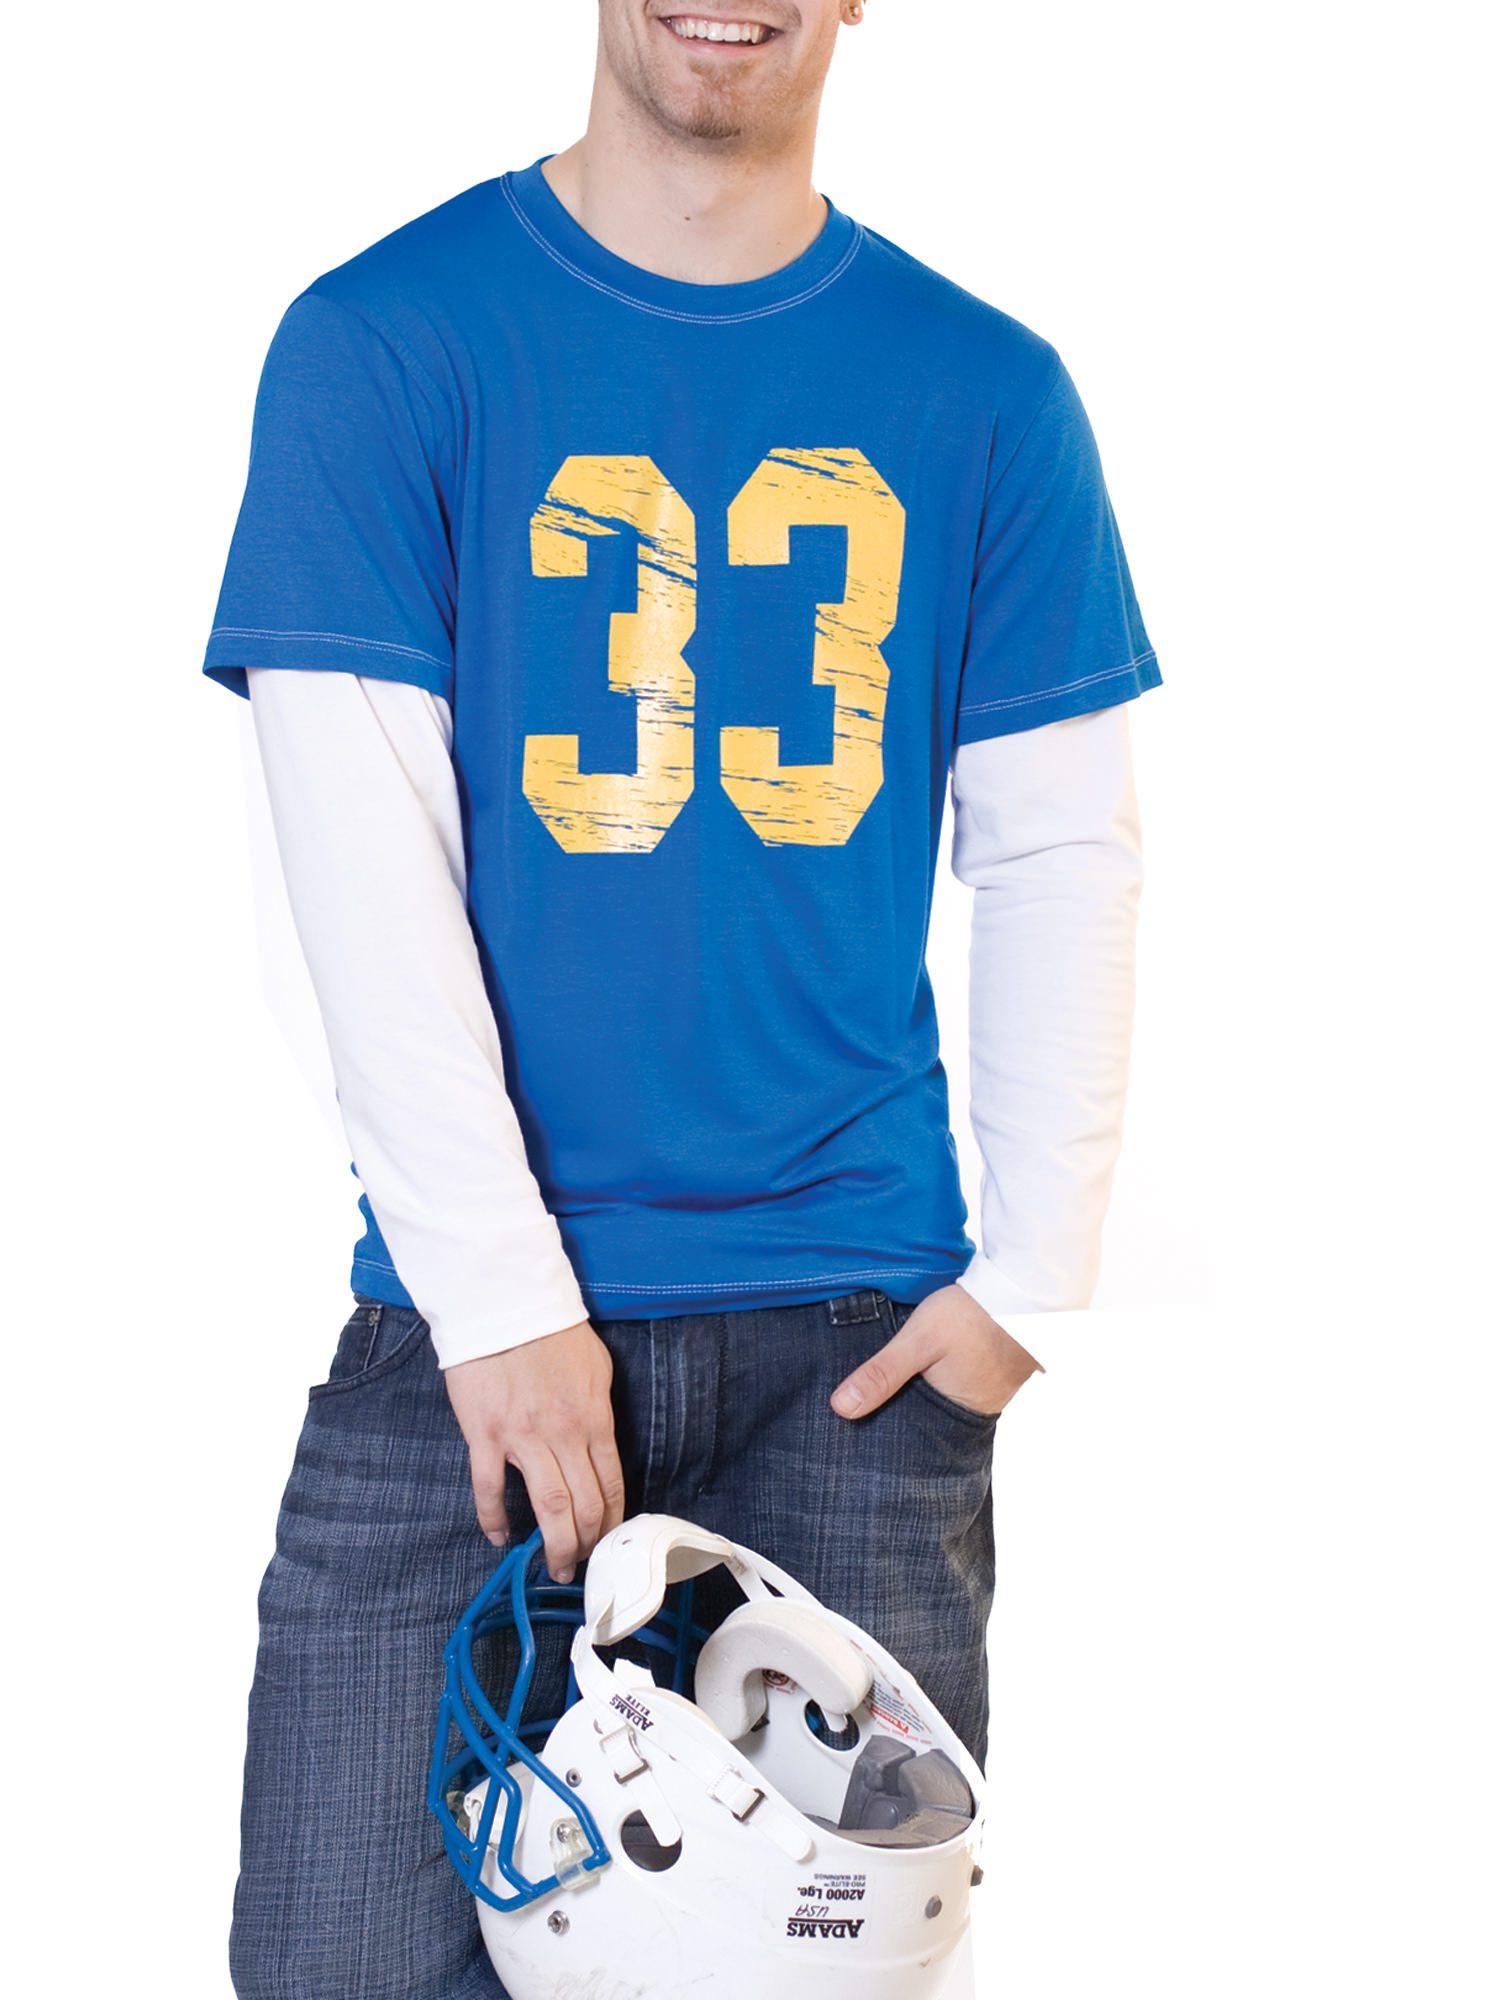 Jalie 2918 - Men's Crew Neck T-Shirt with Double Layer Sleeve